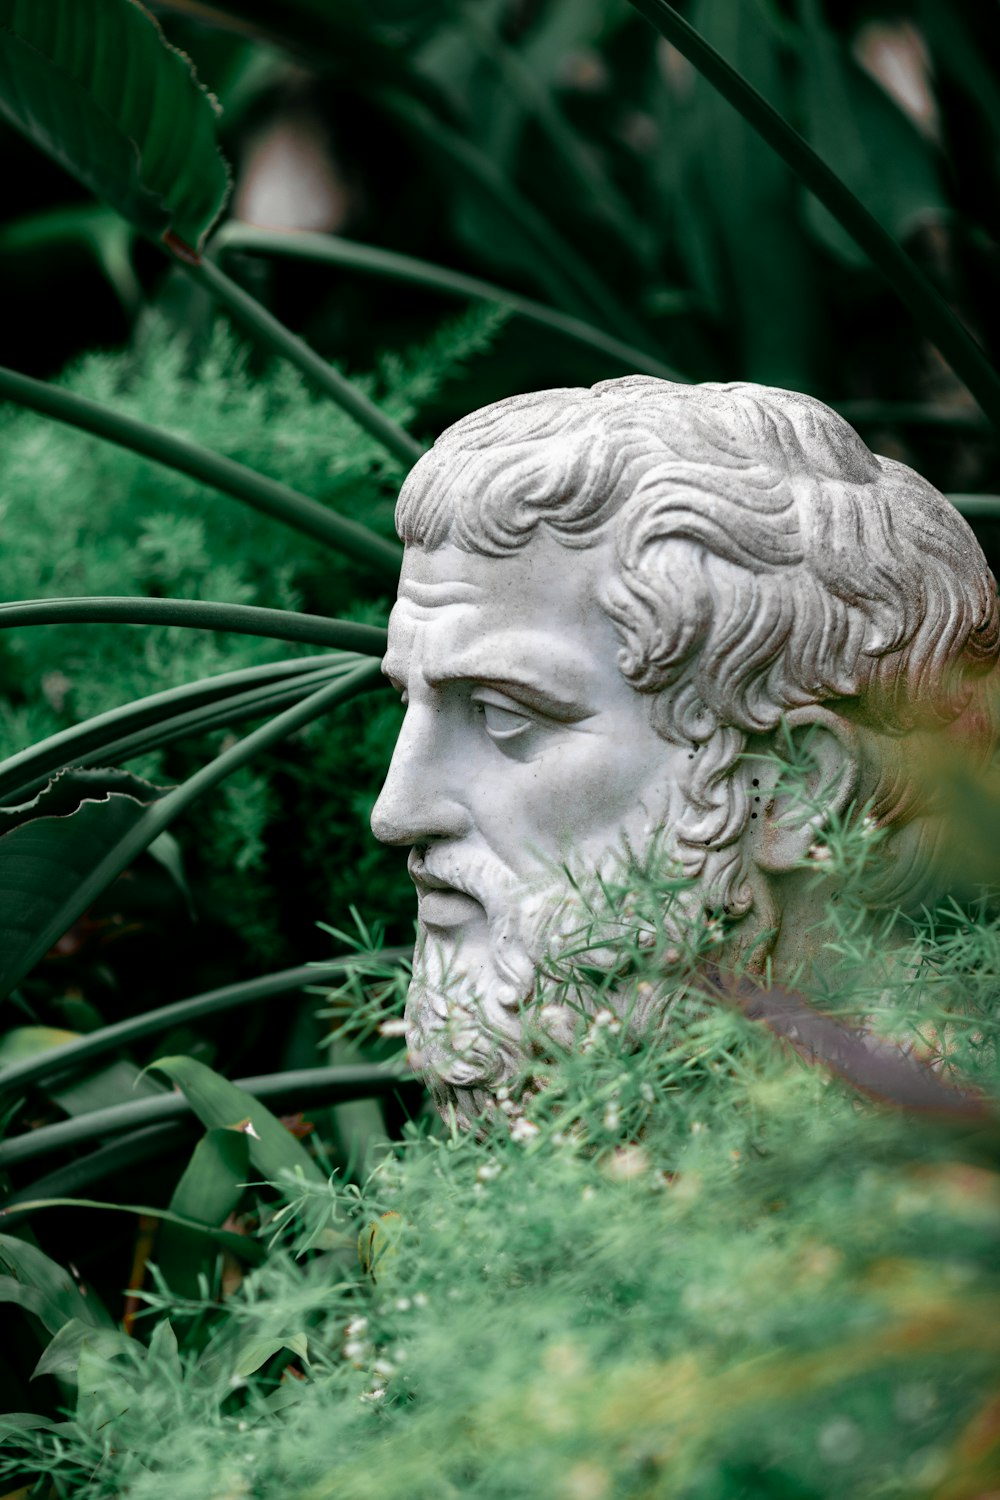 a statue of a man surrounded by plants